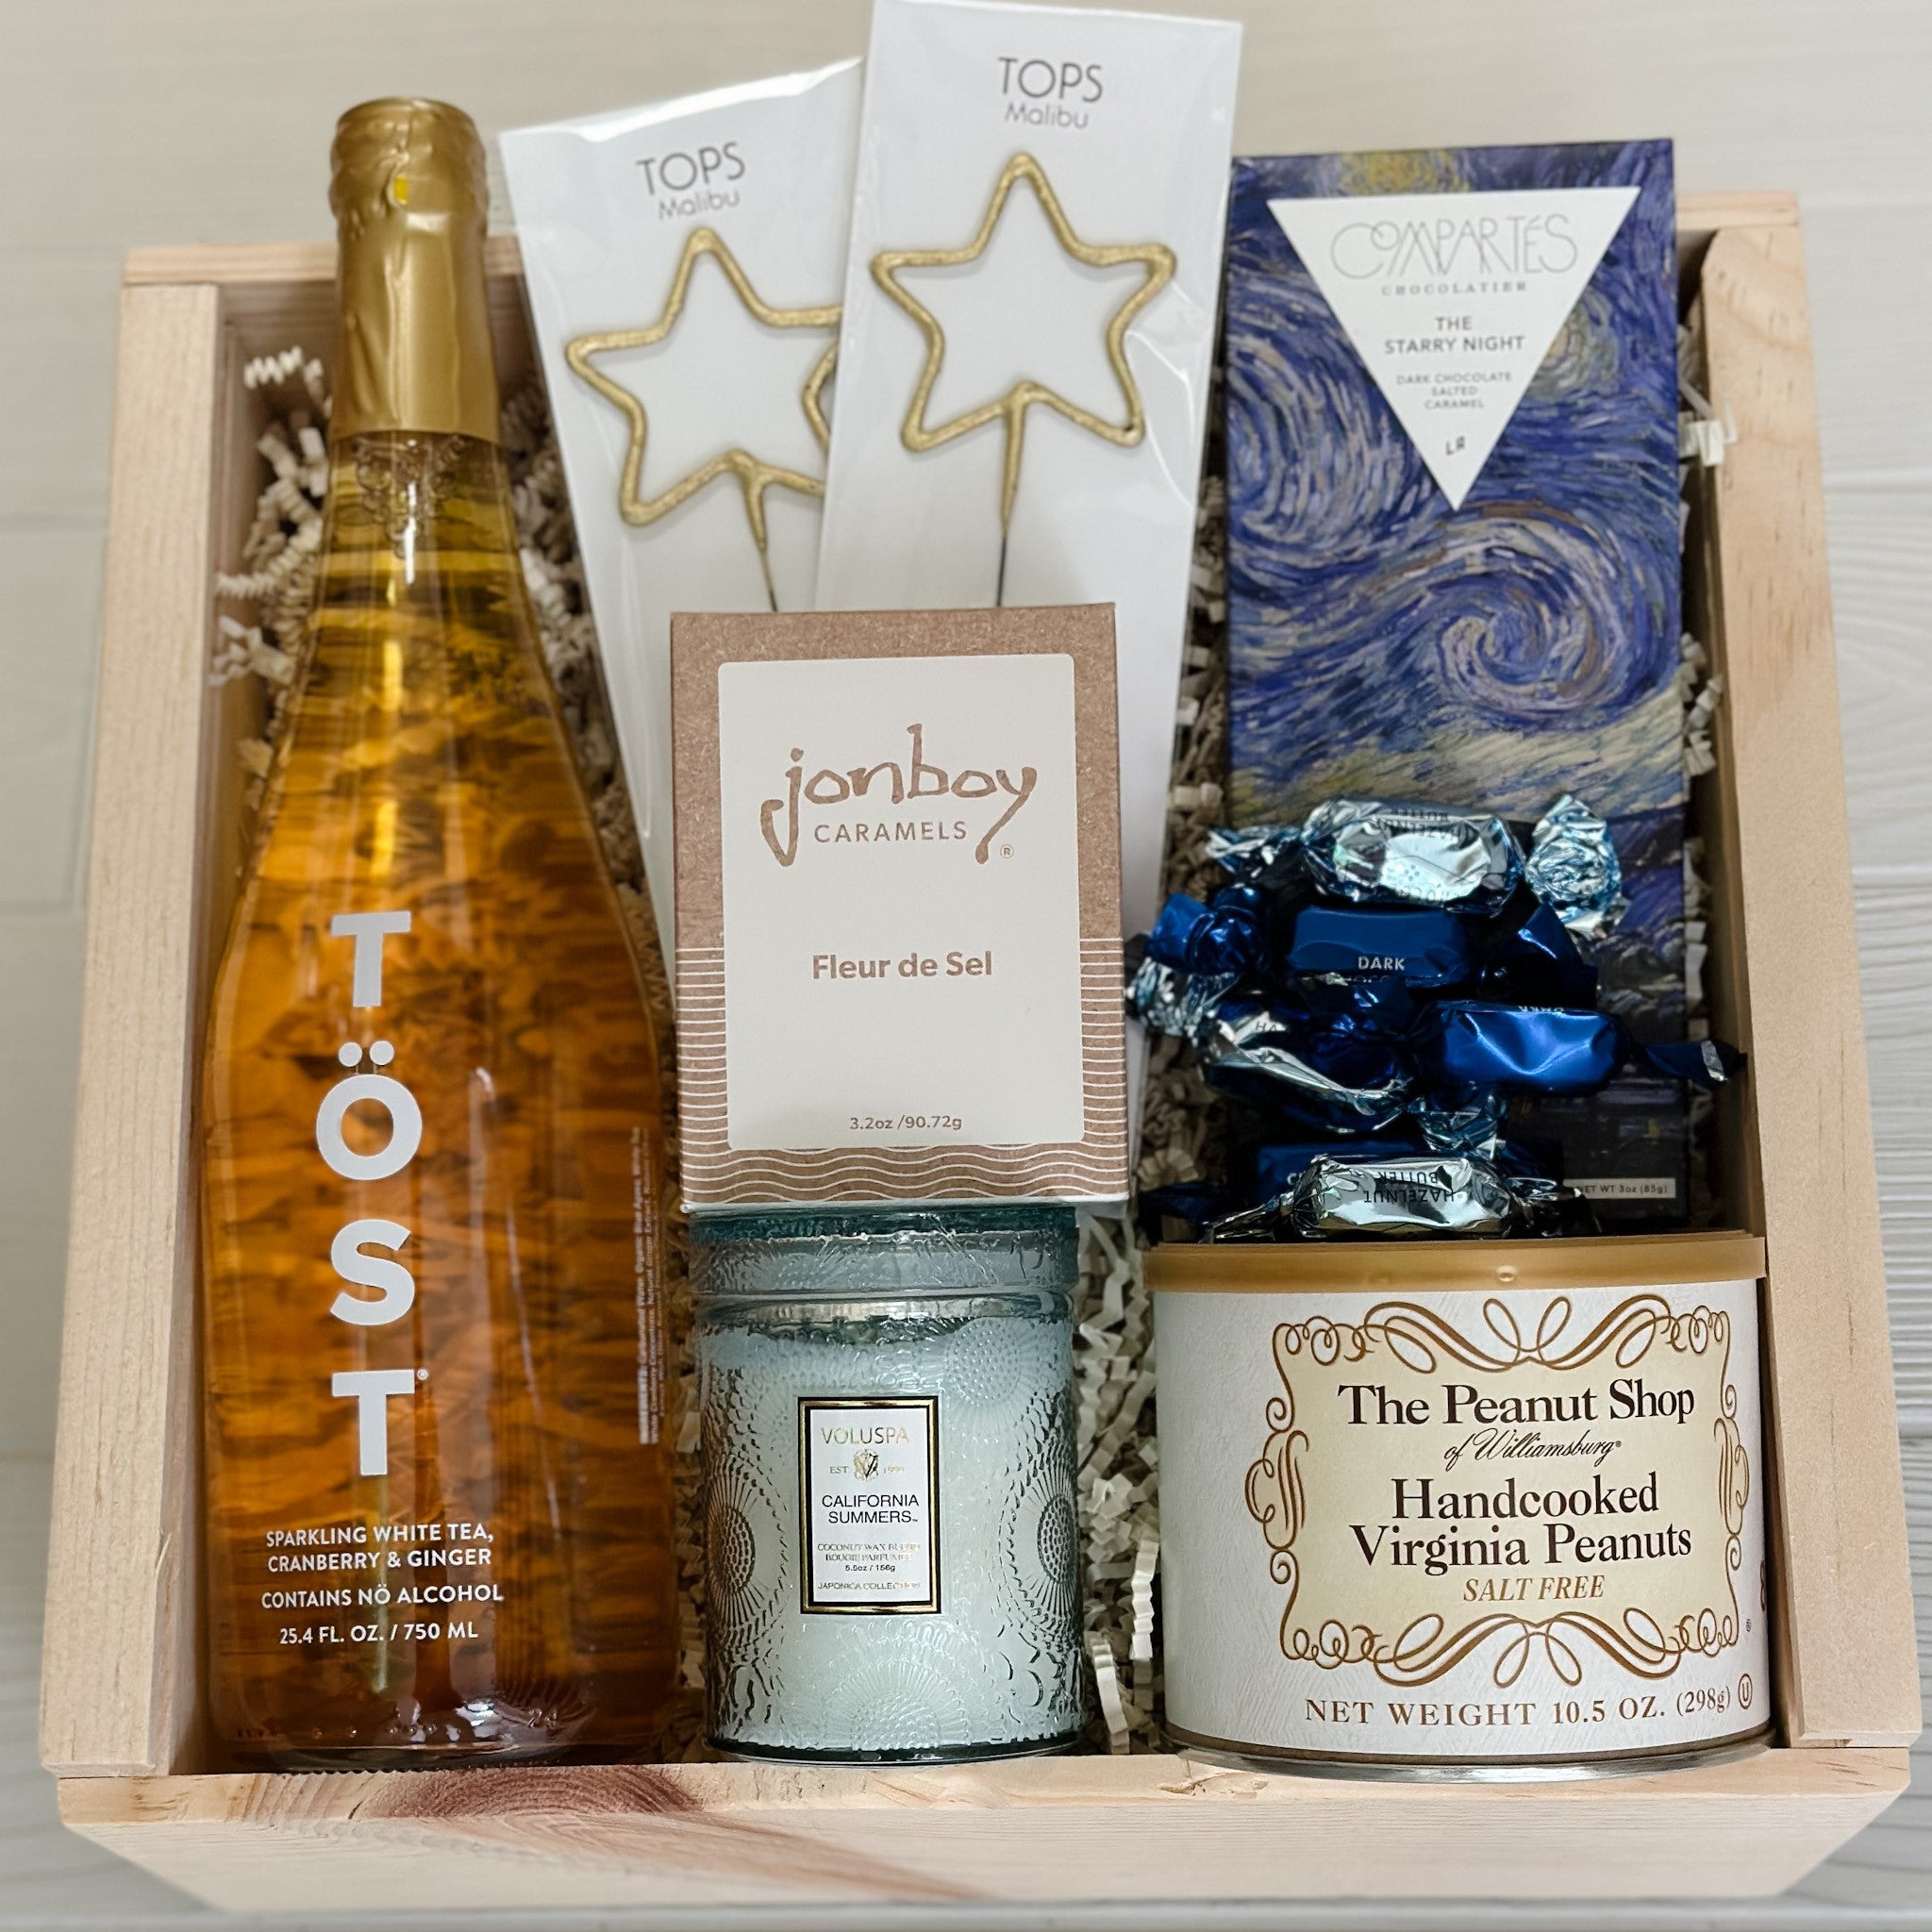 Celebrate non alcoholic gift basket includes sparkling beverage, sparklers, chocolate, caramel, peanuts, candle and truffles.